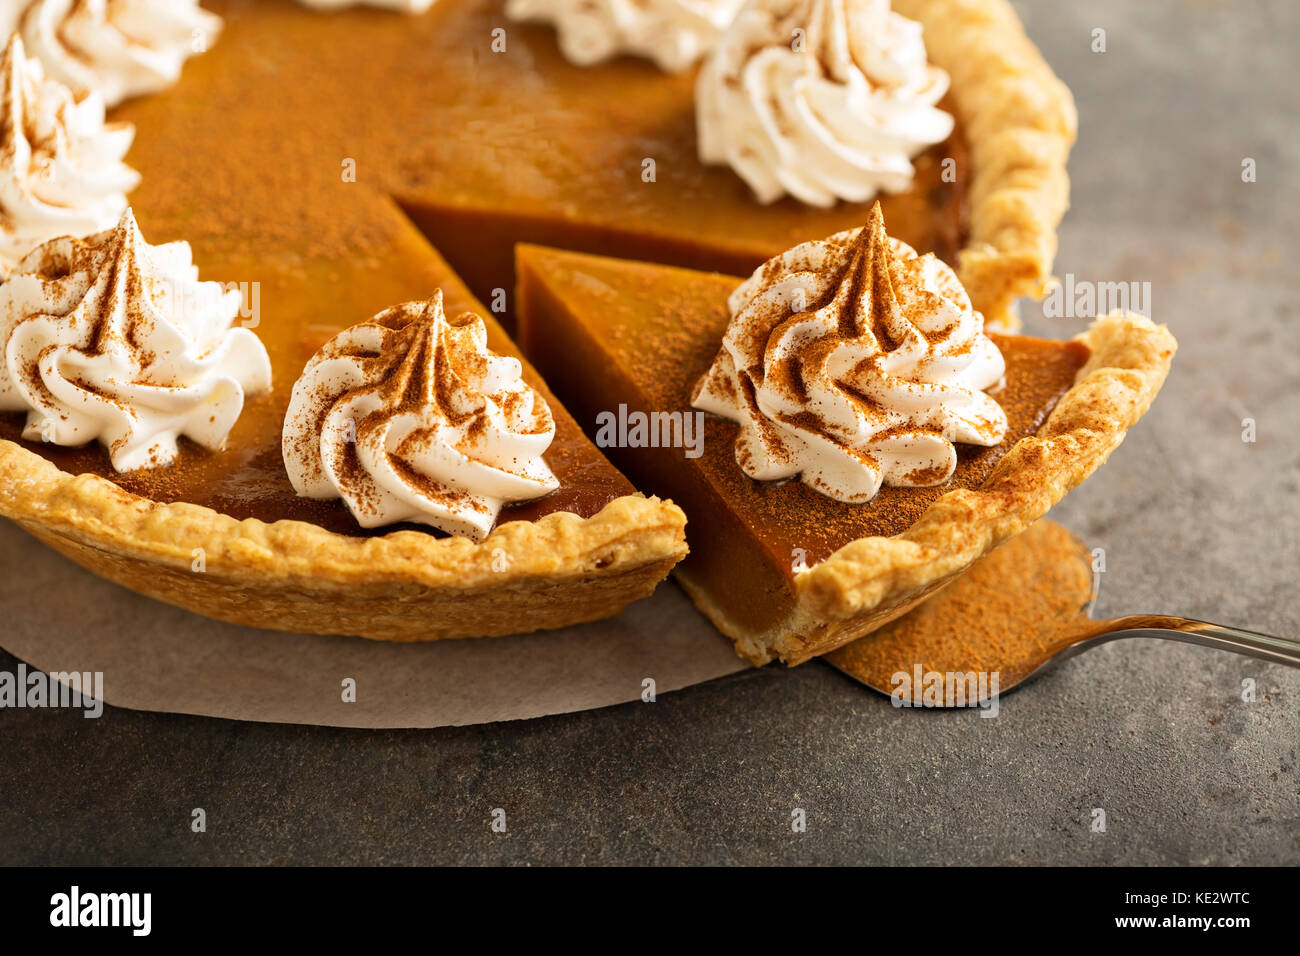 Pumpkin pie with whipped cream Stock Photo